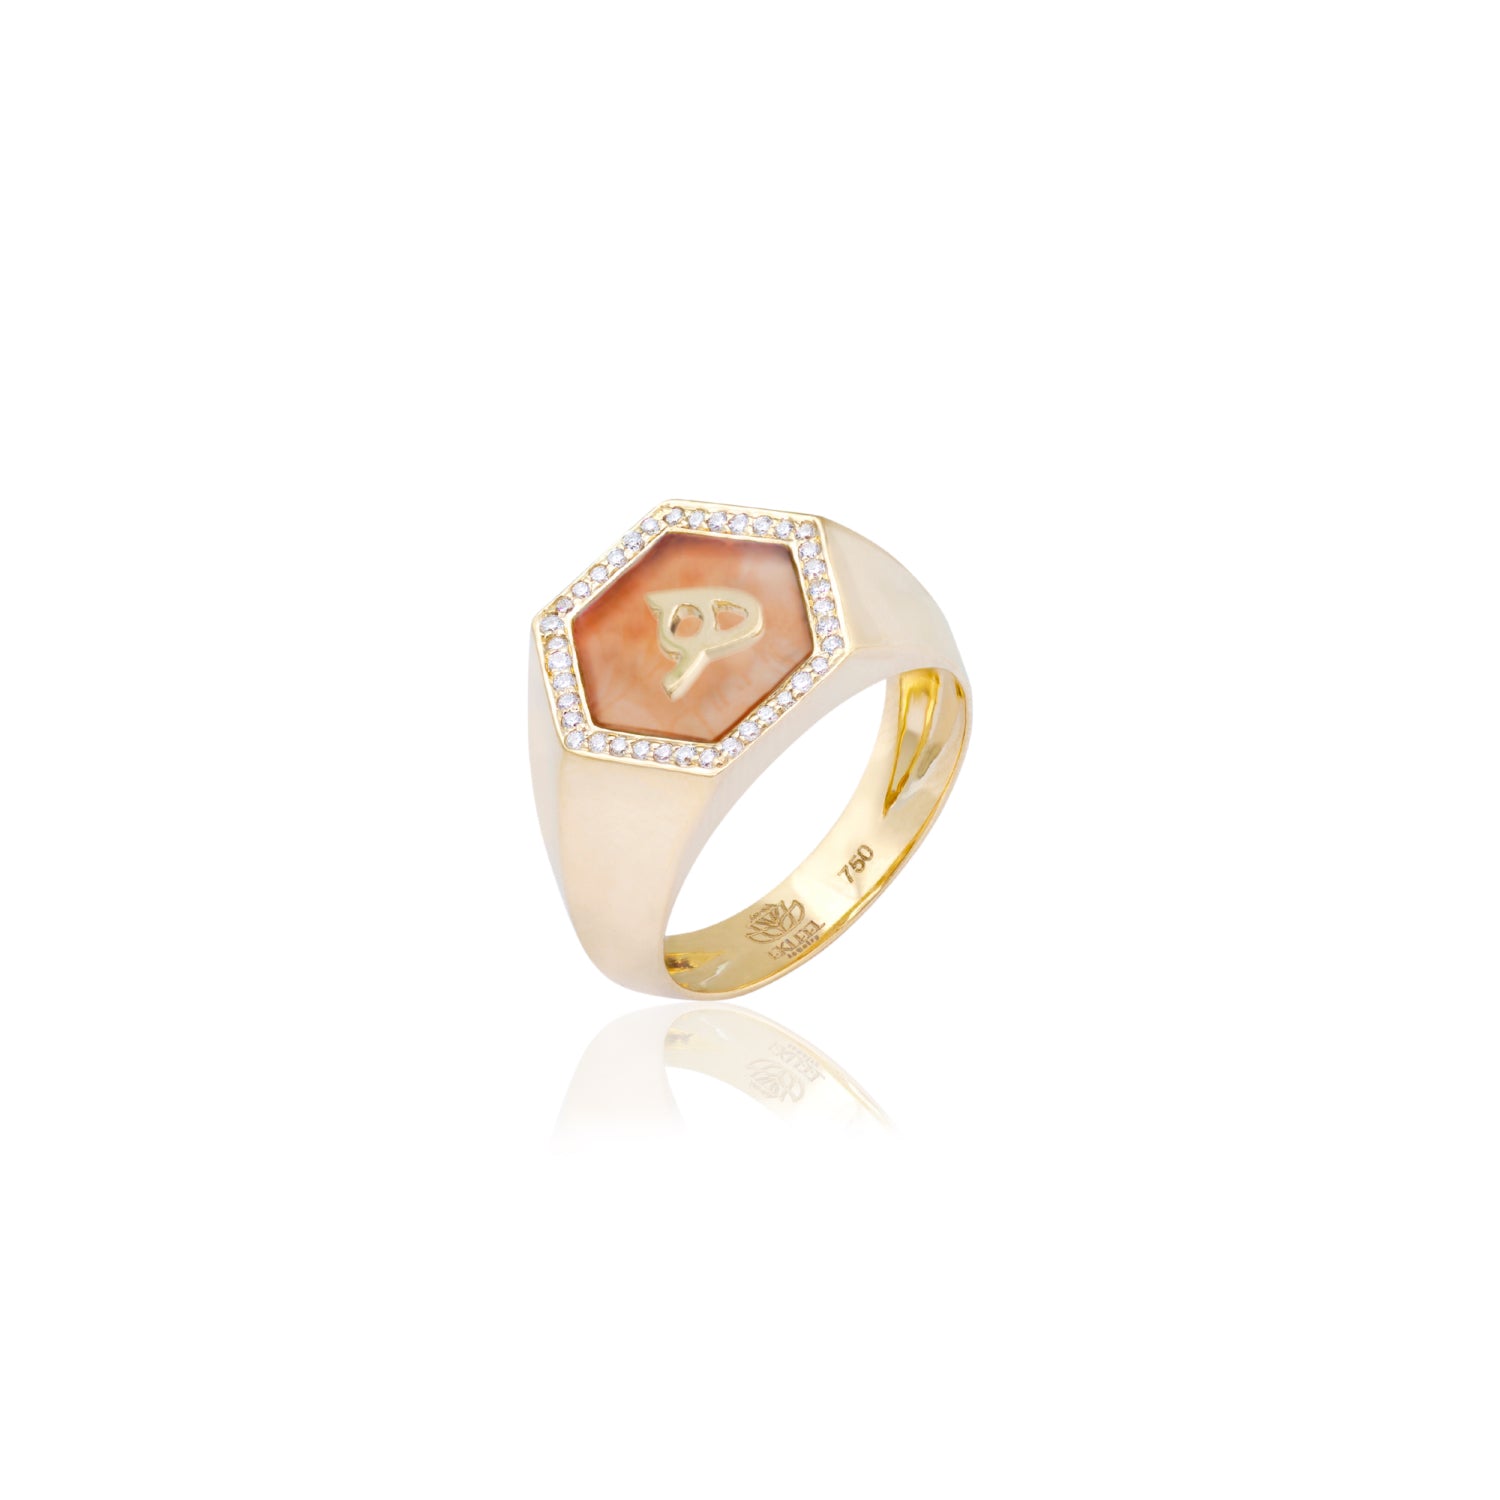 Qamoos 2.0 Letter هـ Carnelian and Diamond Signet Ring in Yellow Gold